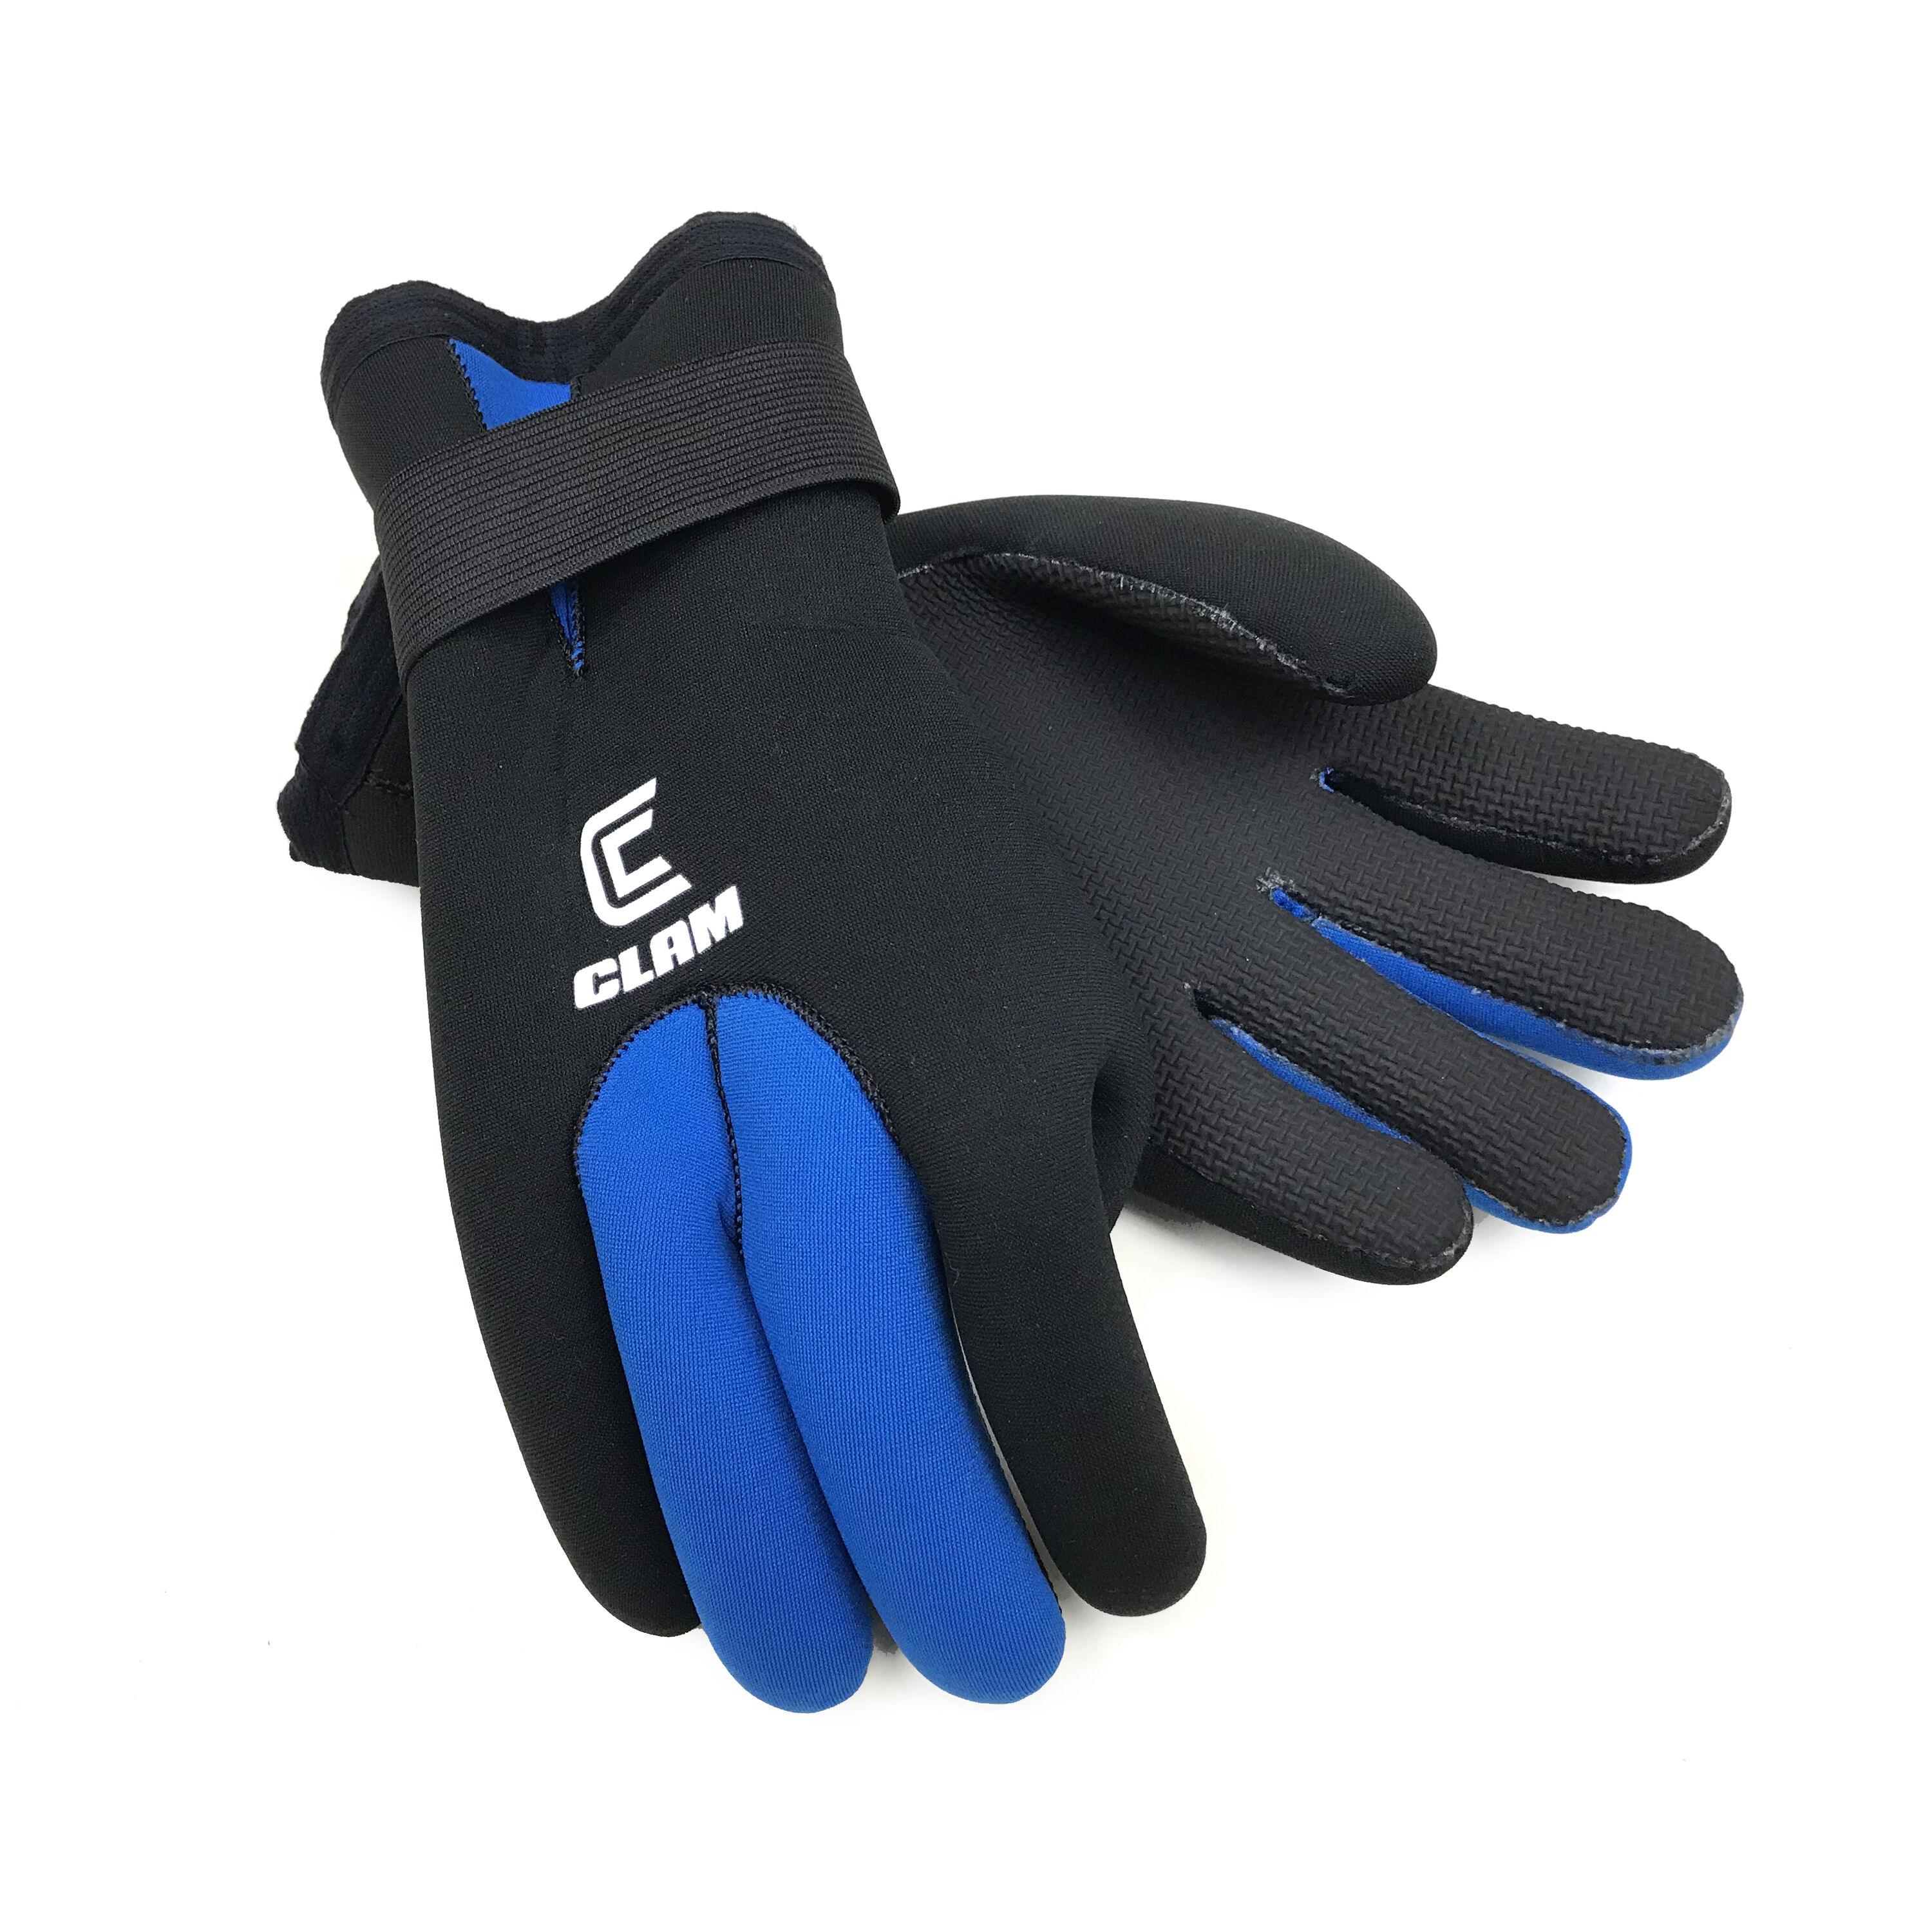 Clam Outdoors Edge Men's Ice Fishing Gloves - Adult Medium, Black,  Waterproof/Breathable, Durable Polyurethane Palm, 3-Year Warranty in the  Fishing Gear & Apparel department at